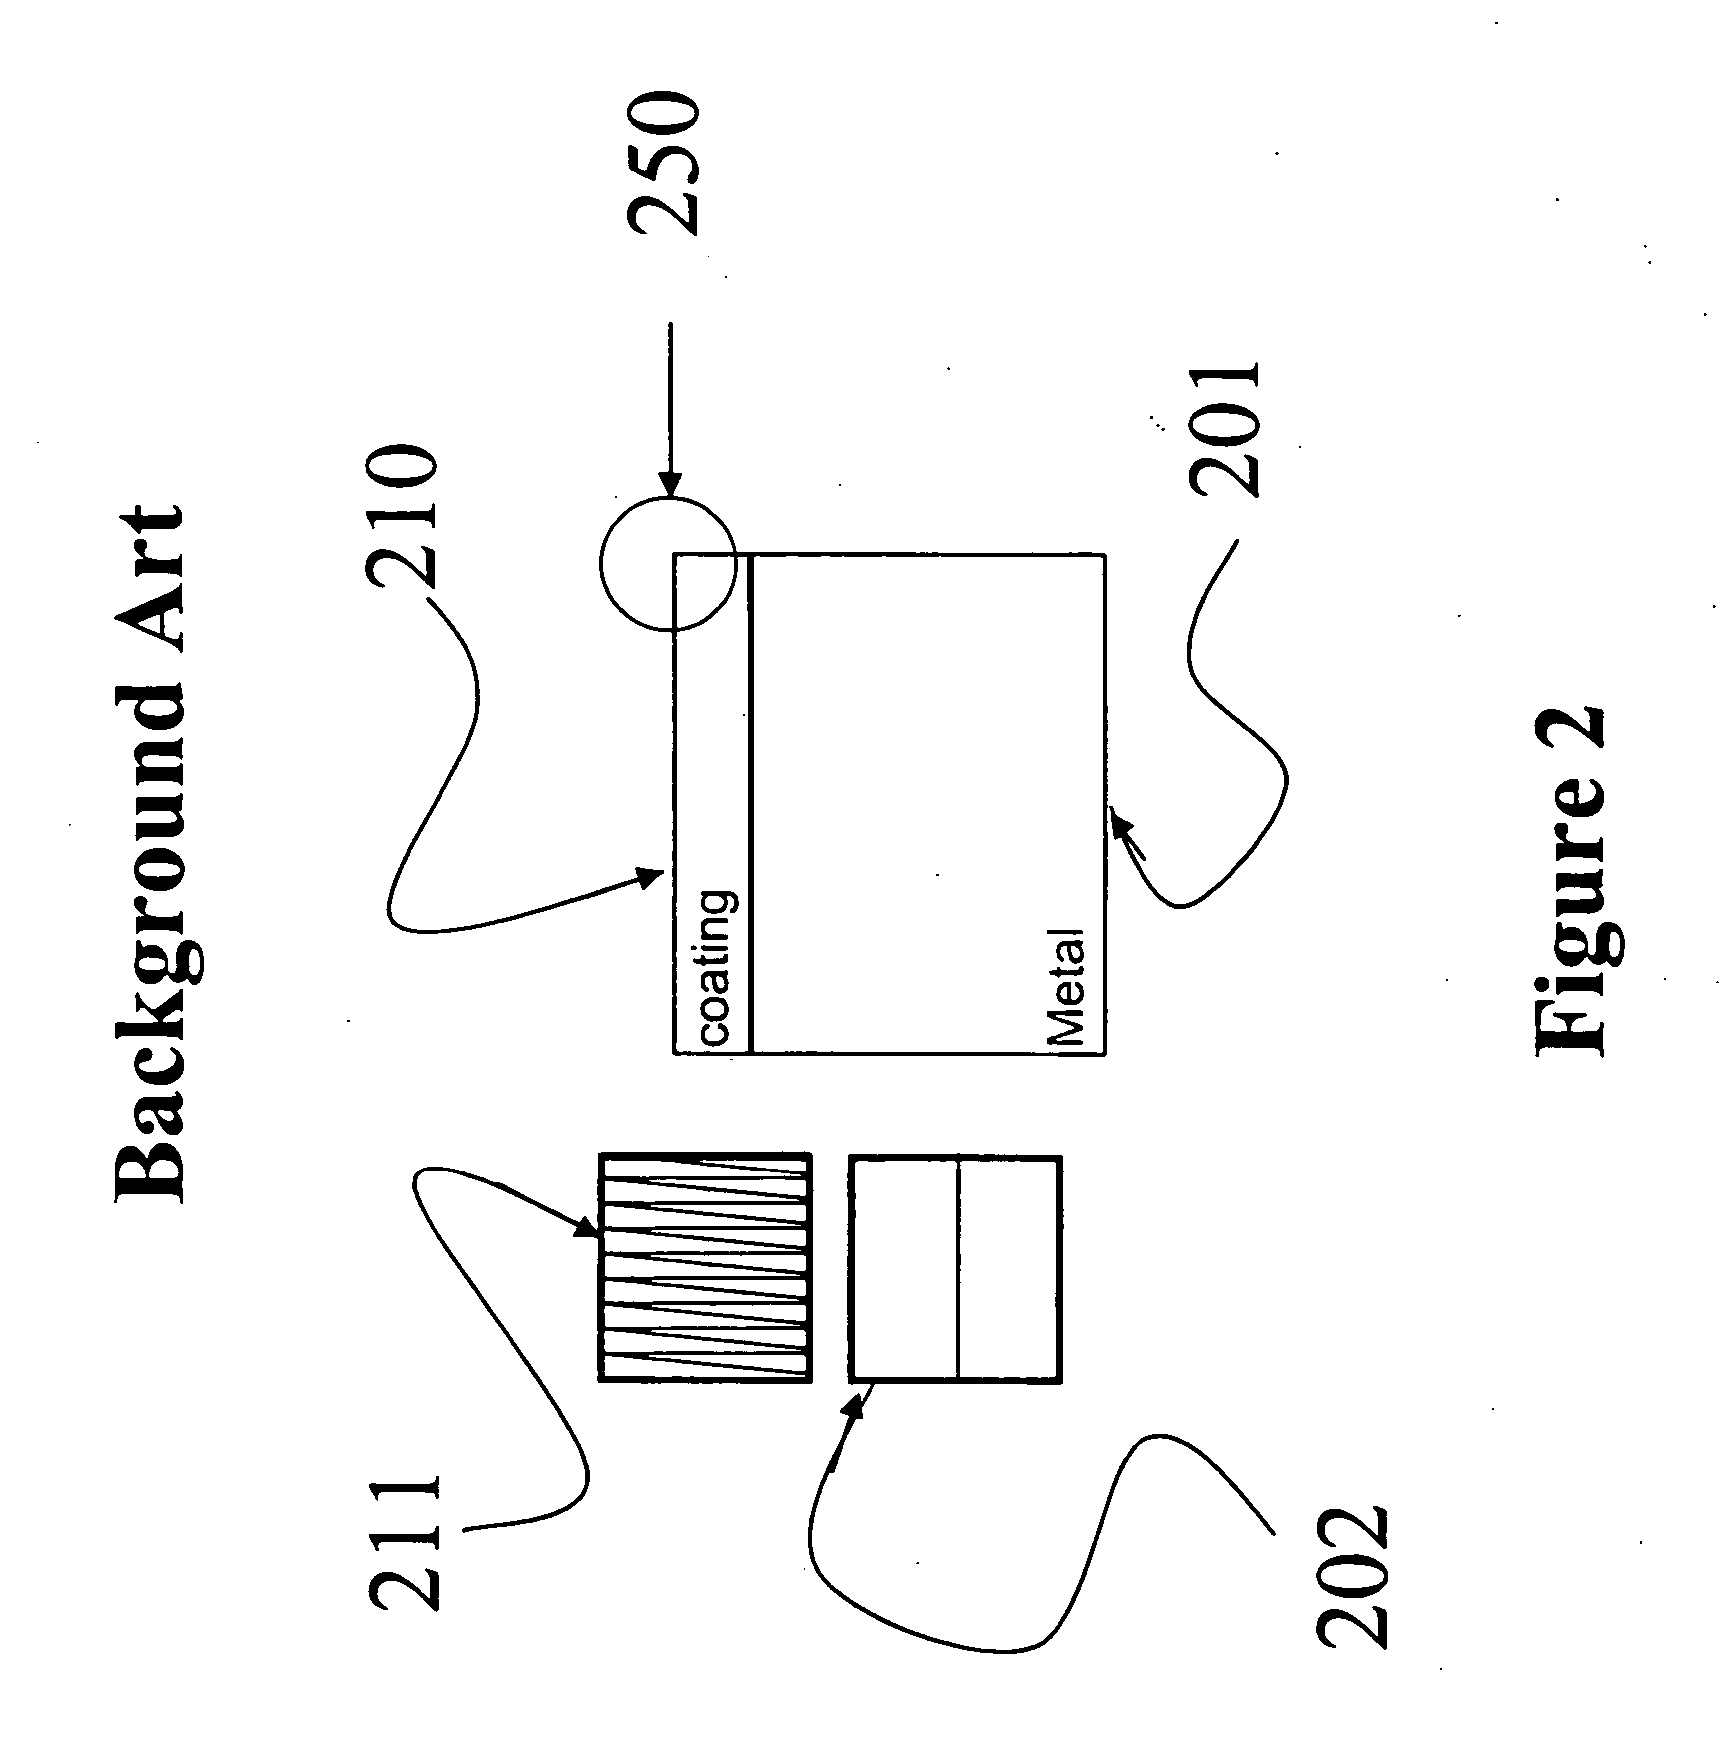 Semiconductive corrosion and fouling control apparatus, system, and method